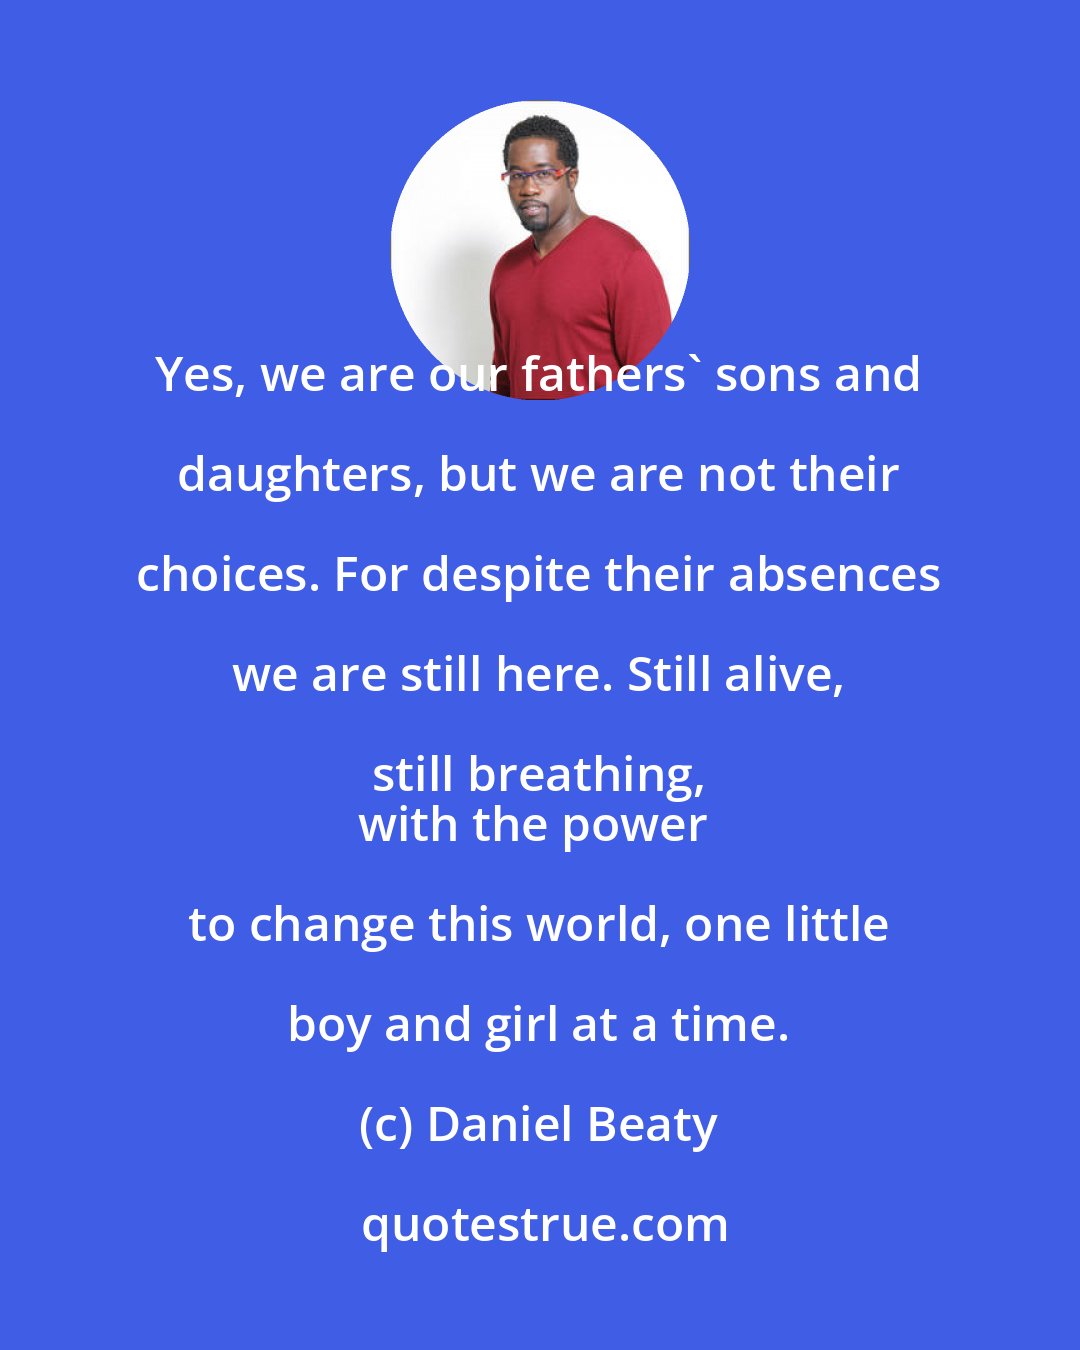 Daniel Beaty: Yes, we are our fathers' sons and daughters, but we are not their choices. For despite their absences we are still here. Still alive, still breathing, 
with the power to change this world, one little boy and girl at a time.